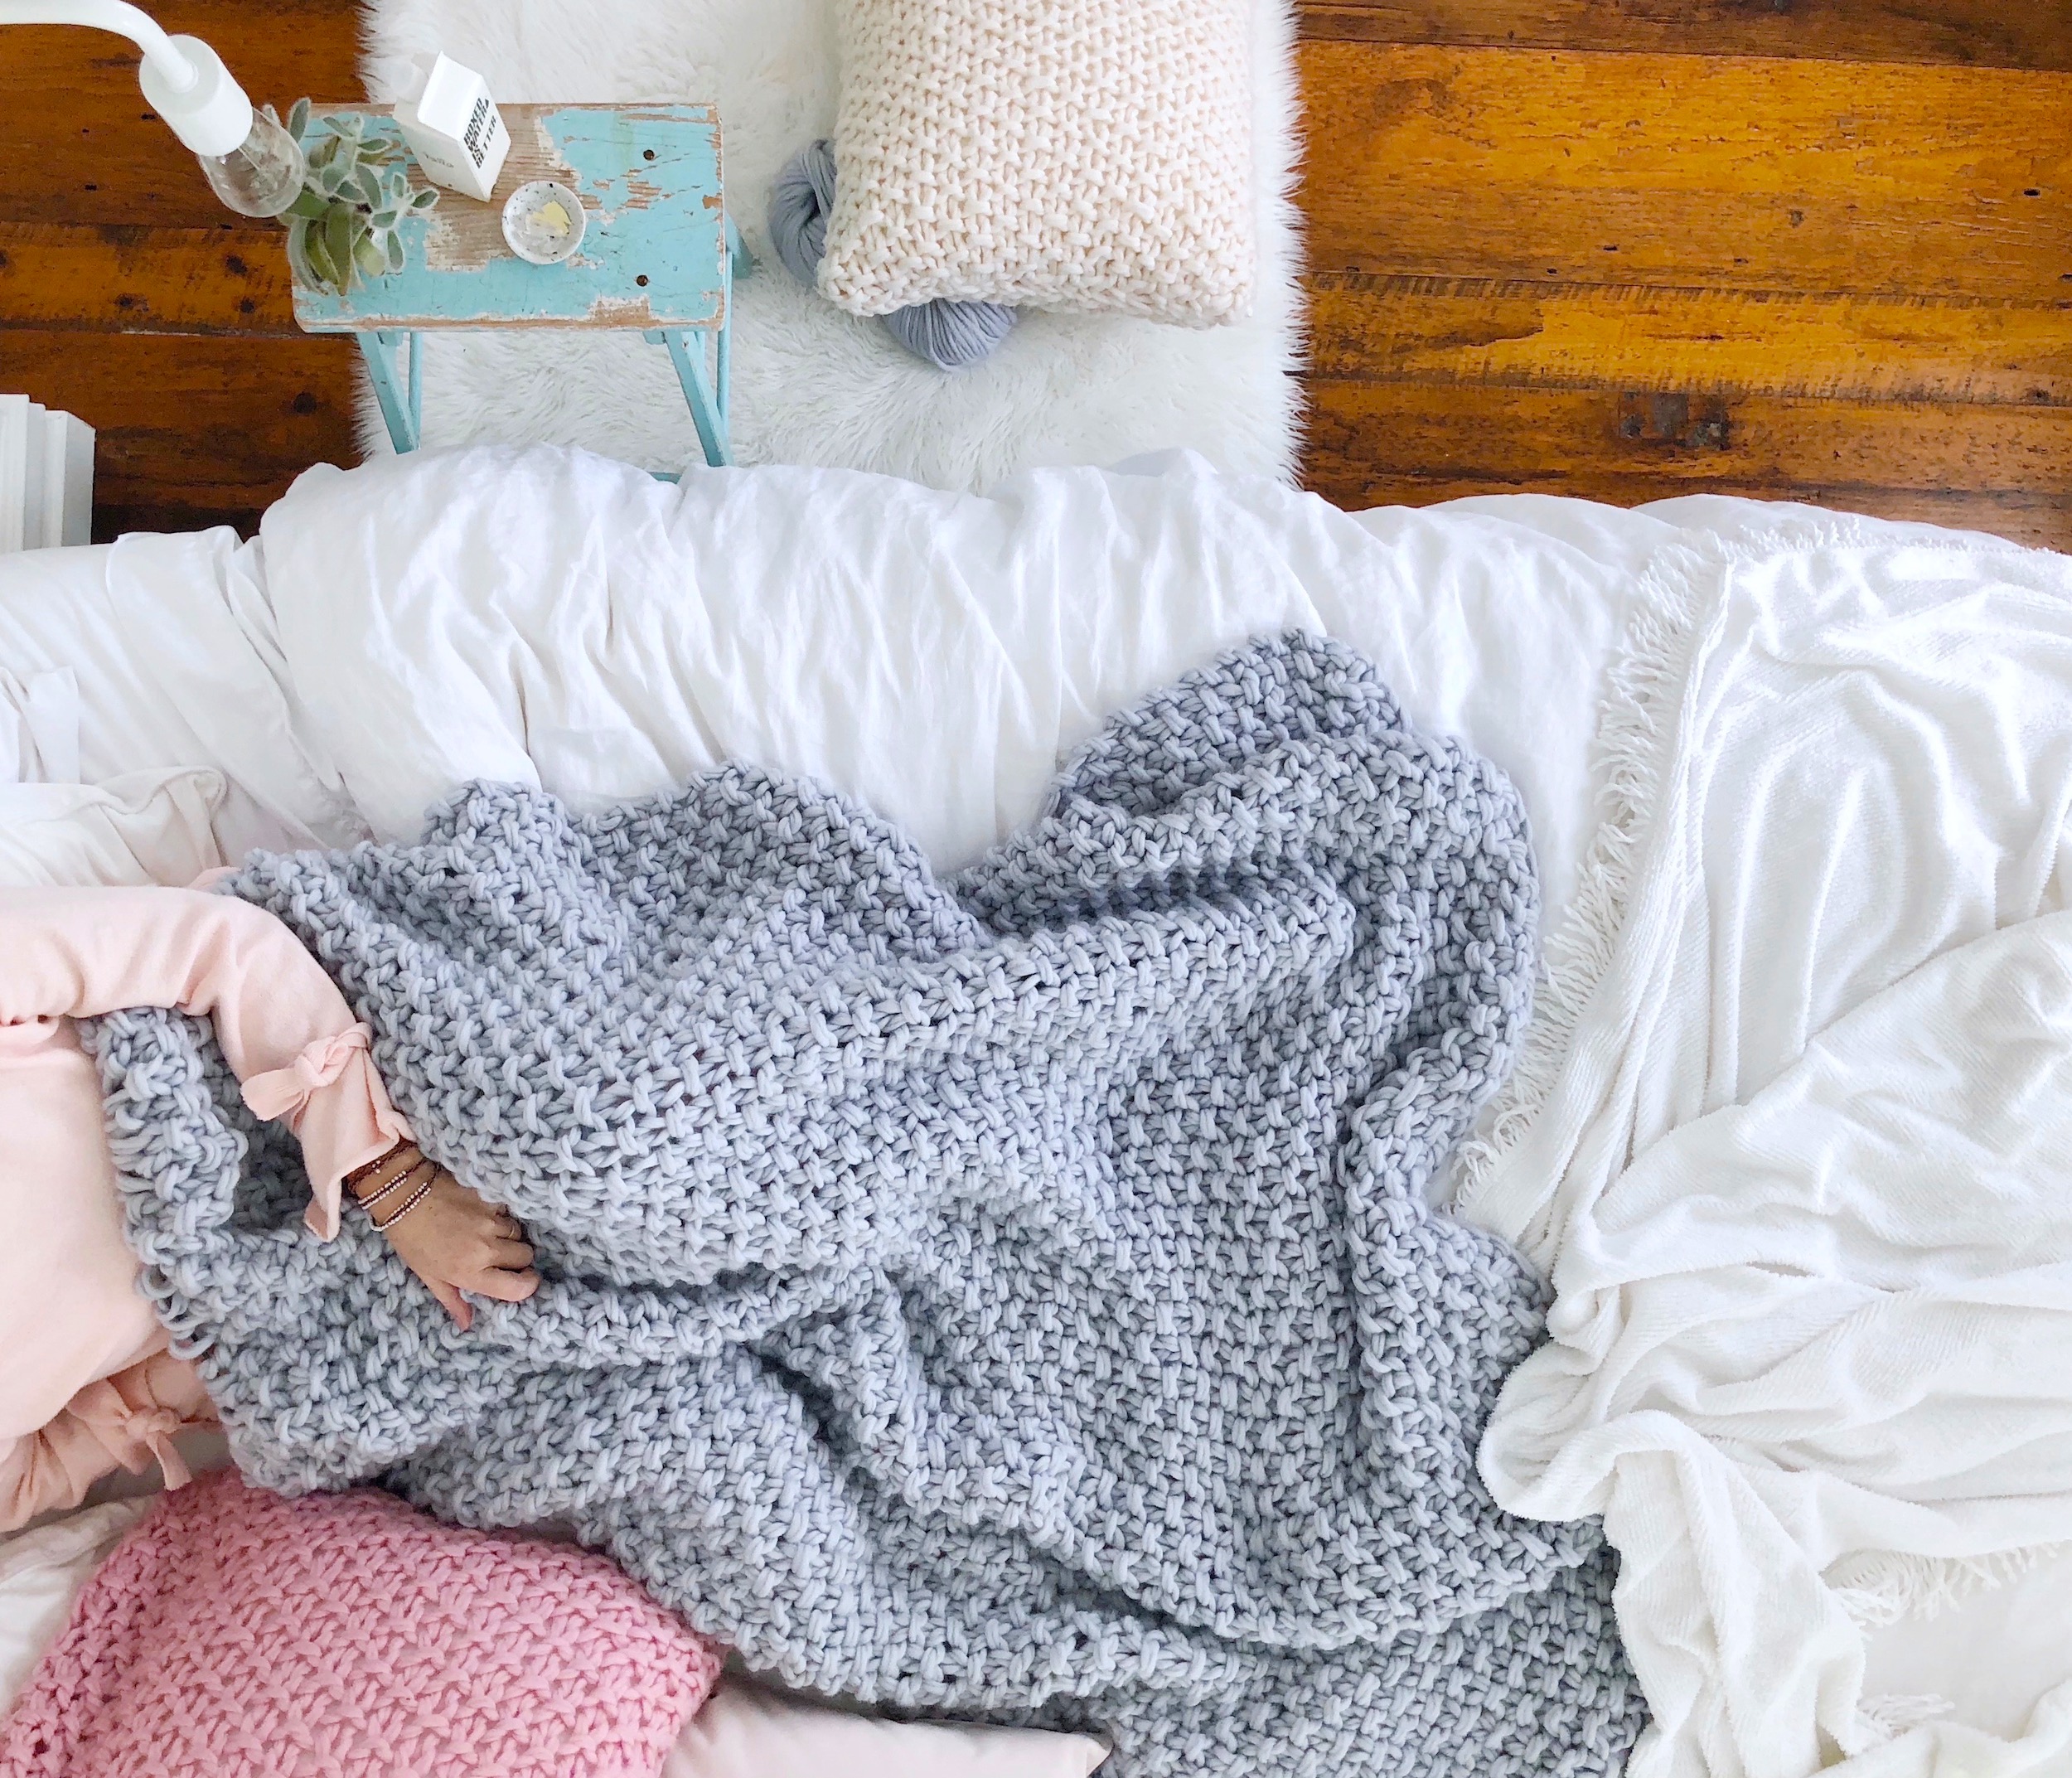 How to make a chunky knit blanket ! Everything you need to make a gorgeous chunky wool blanket. Wool, circular knitting needles and a gorgy gorgeous pattern!